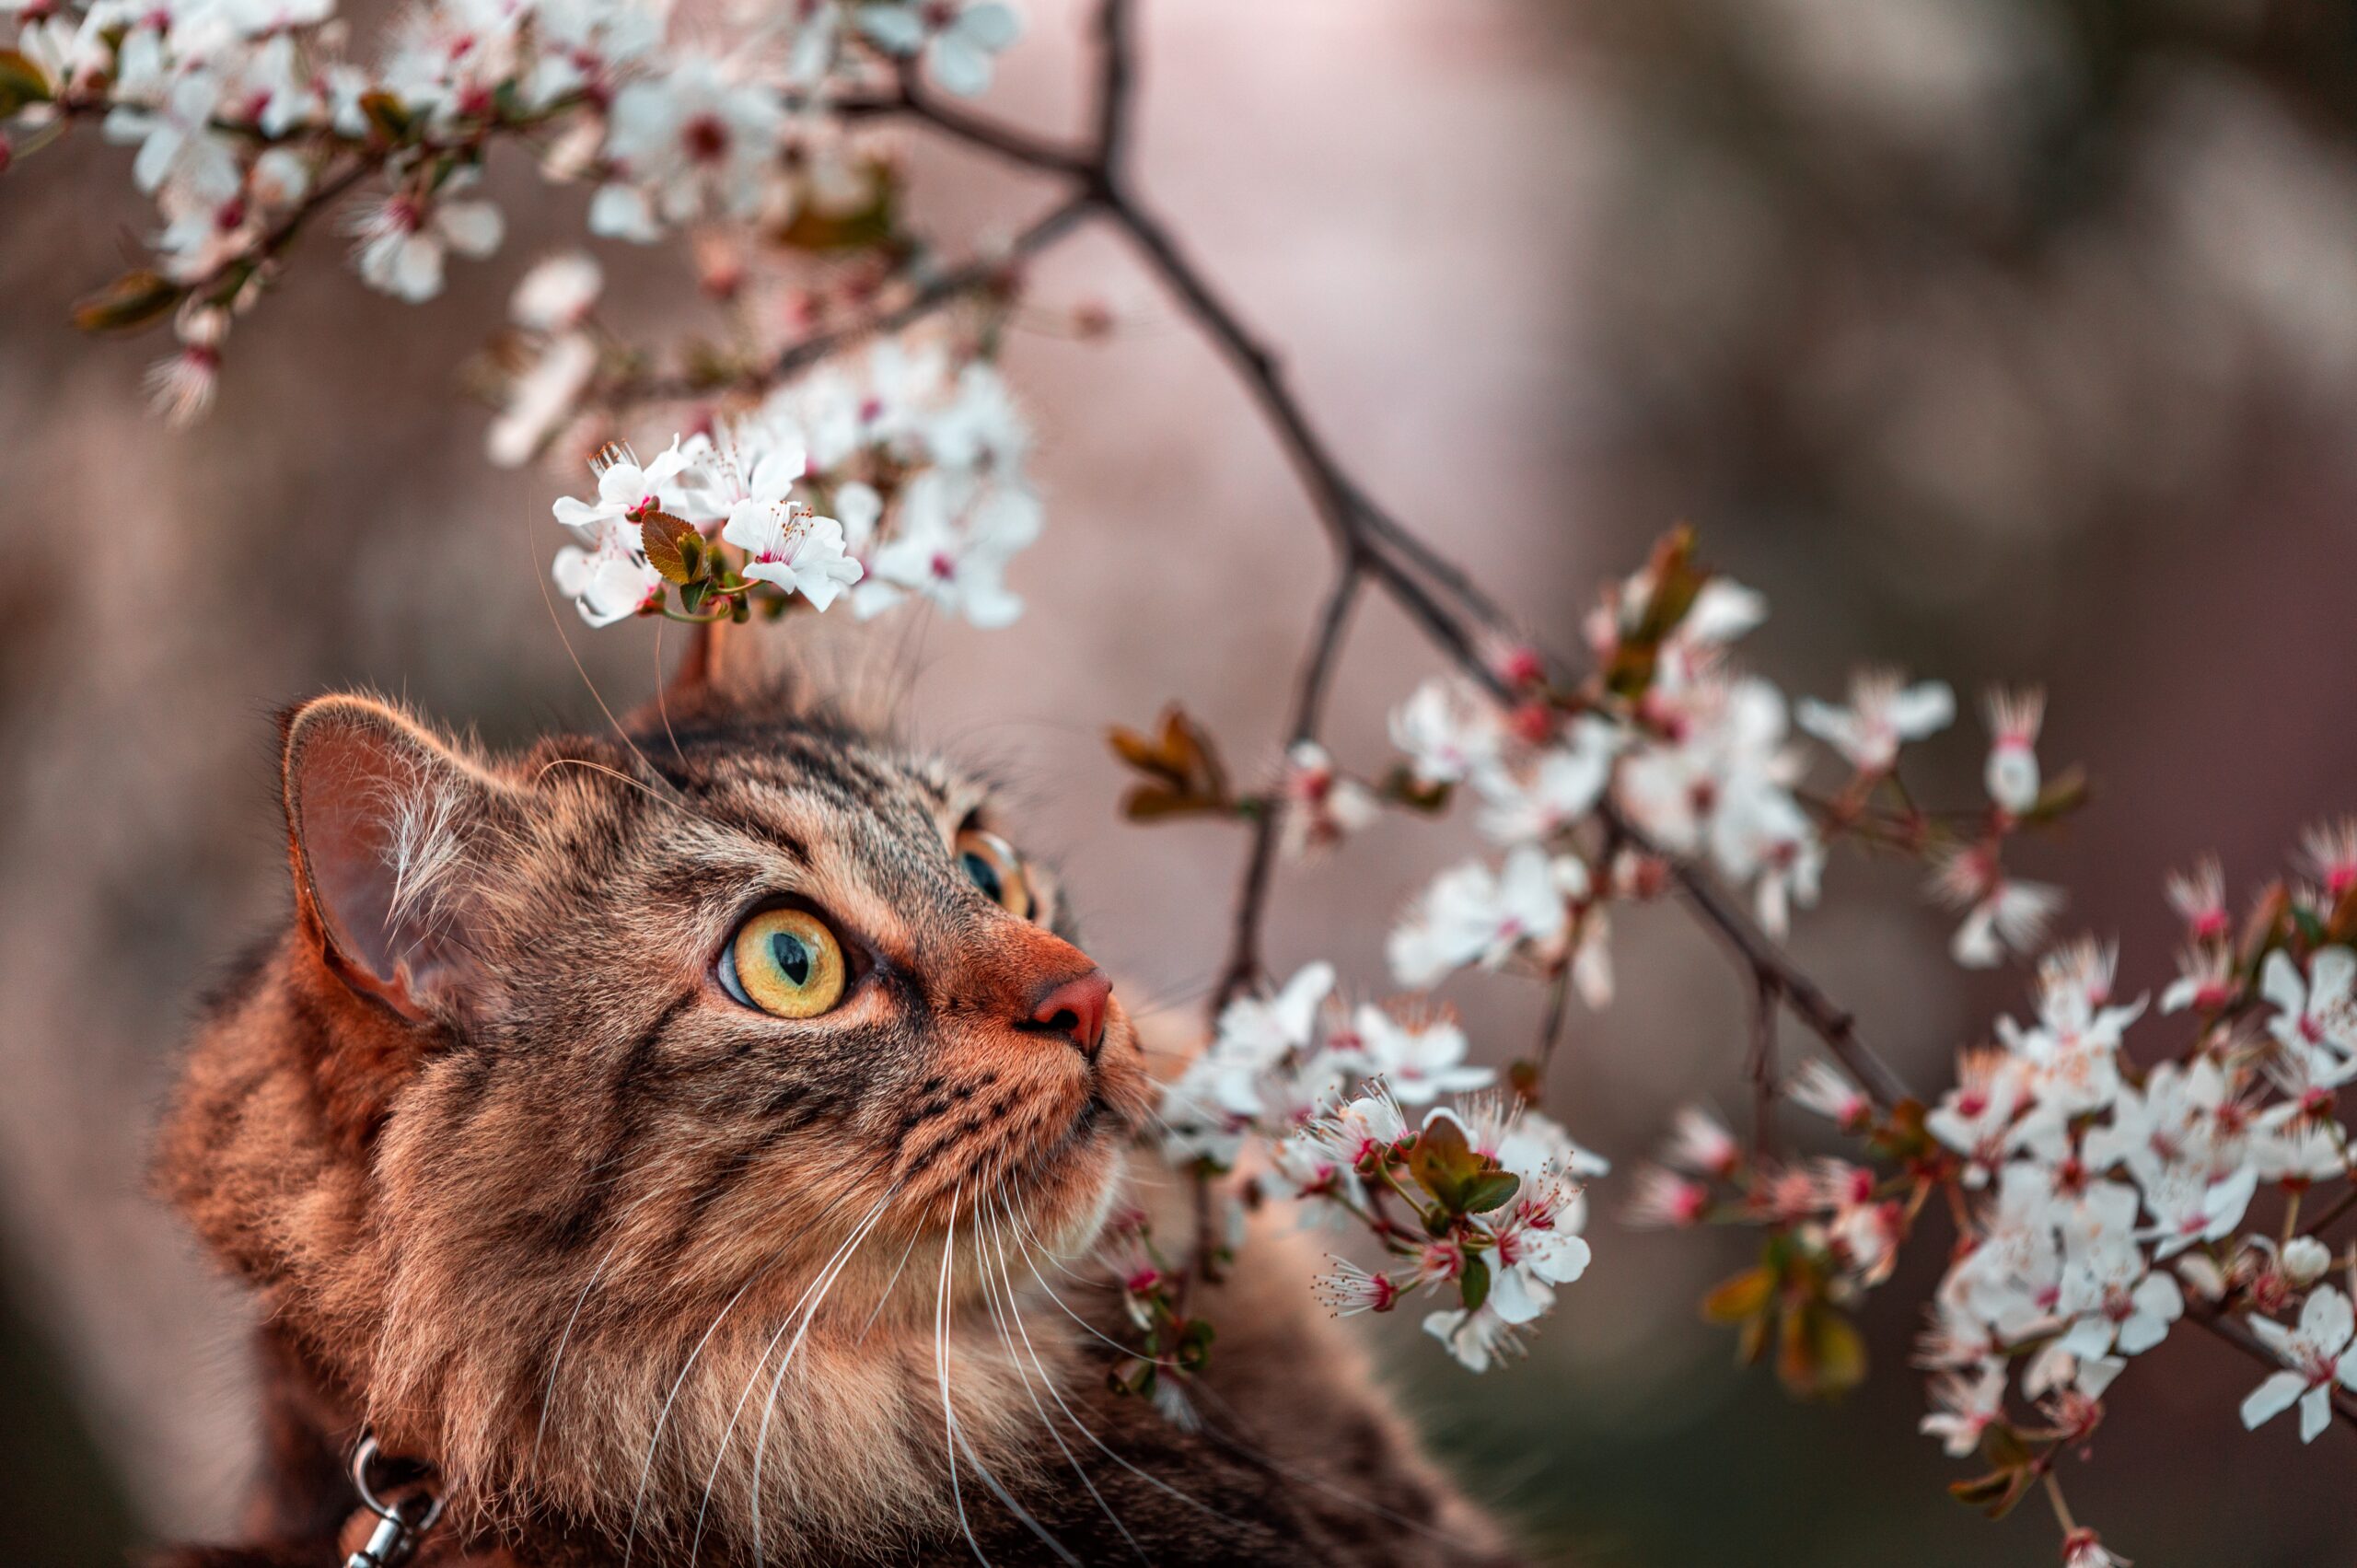 Brown long-haired cat by a cherry blossom tree